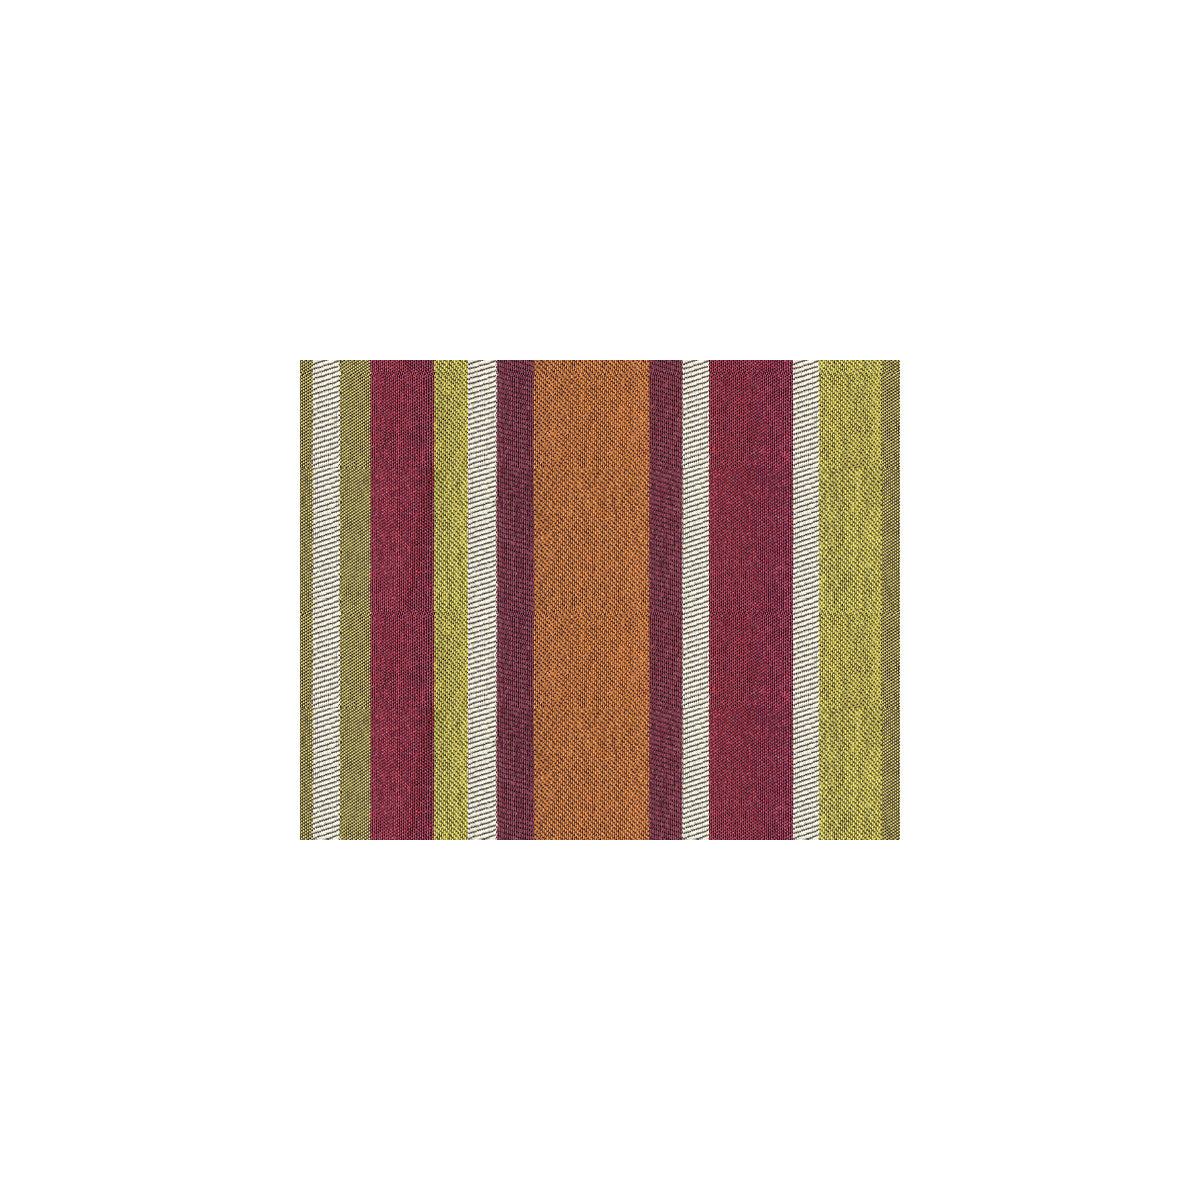 Roadline fabric in mulberry color - pattern 31543.310.0 - by Kravet Contract in the Contract Gis collection